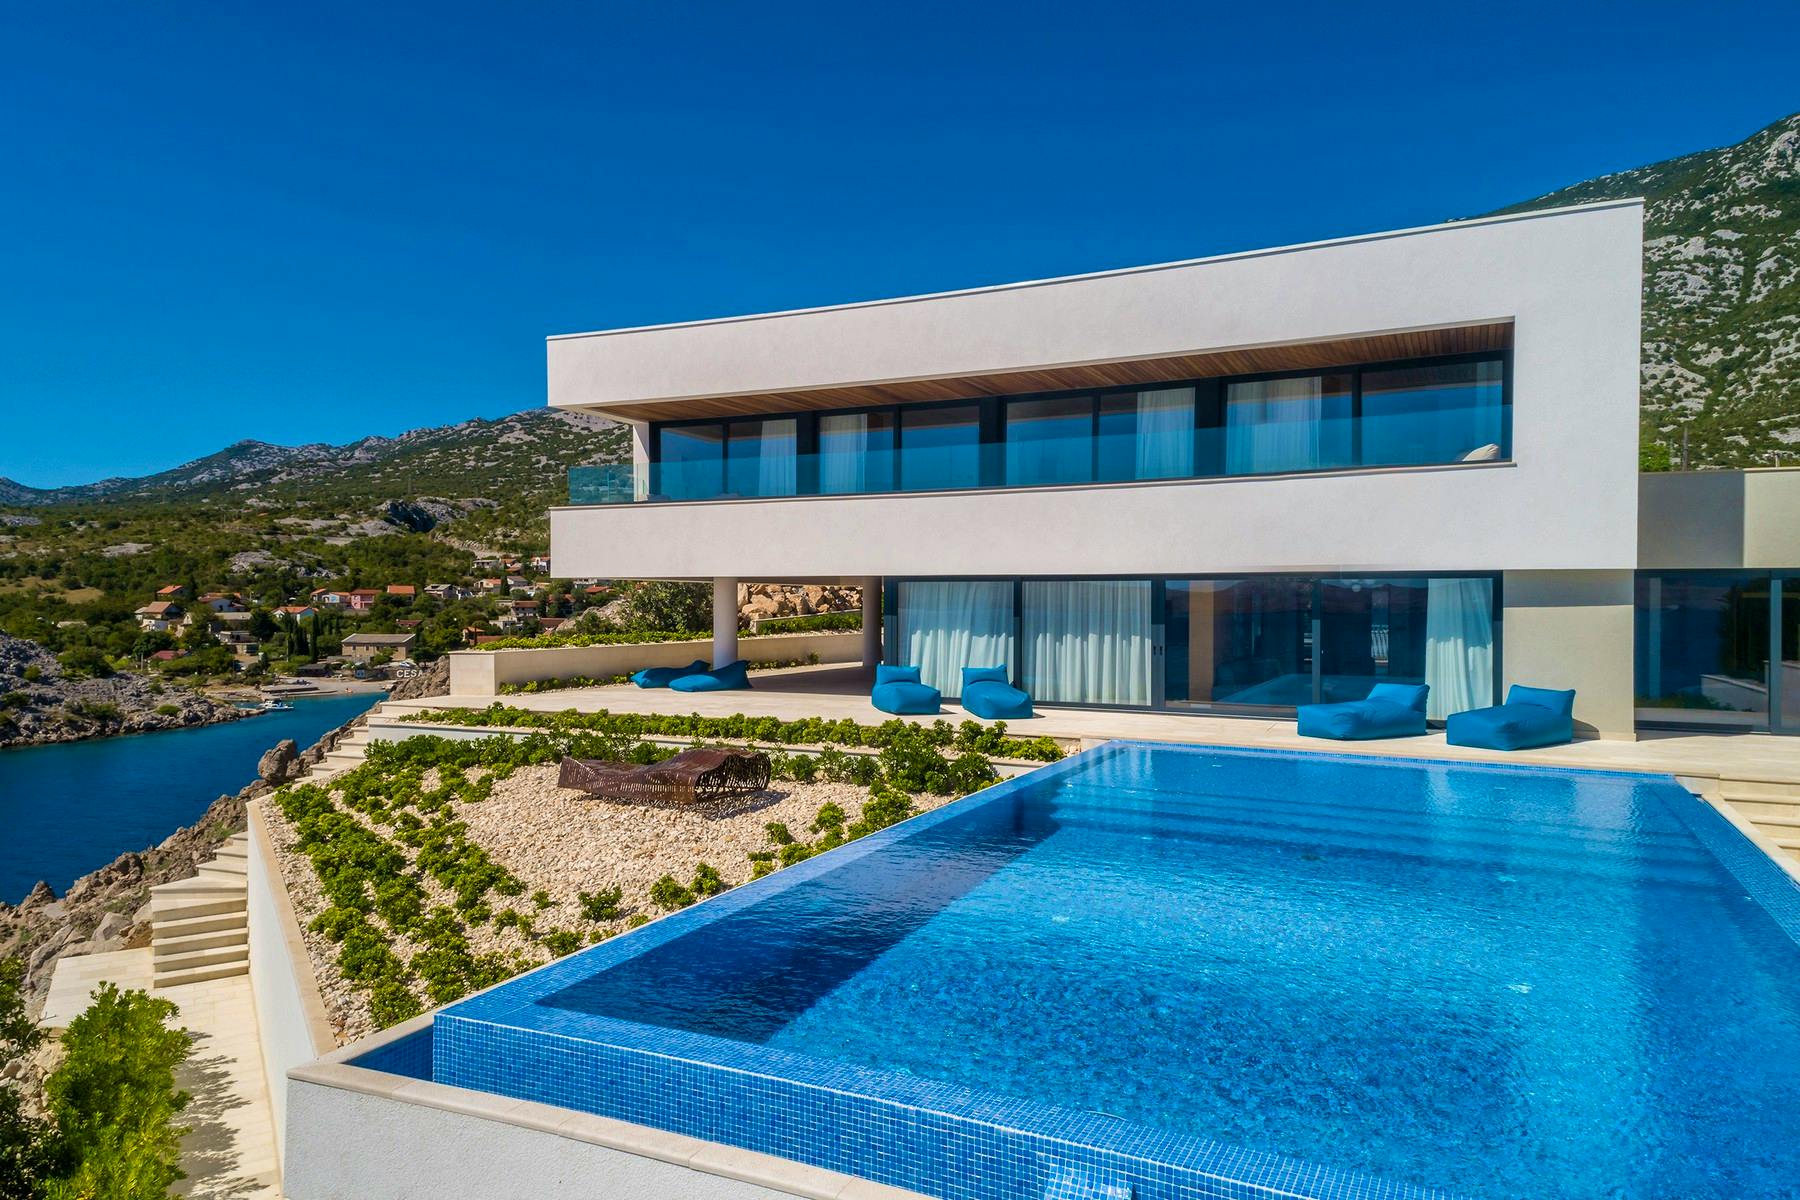 Newly built modern villa with infinity pool